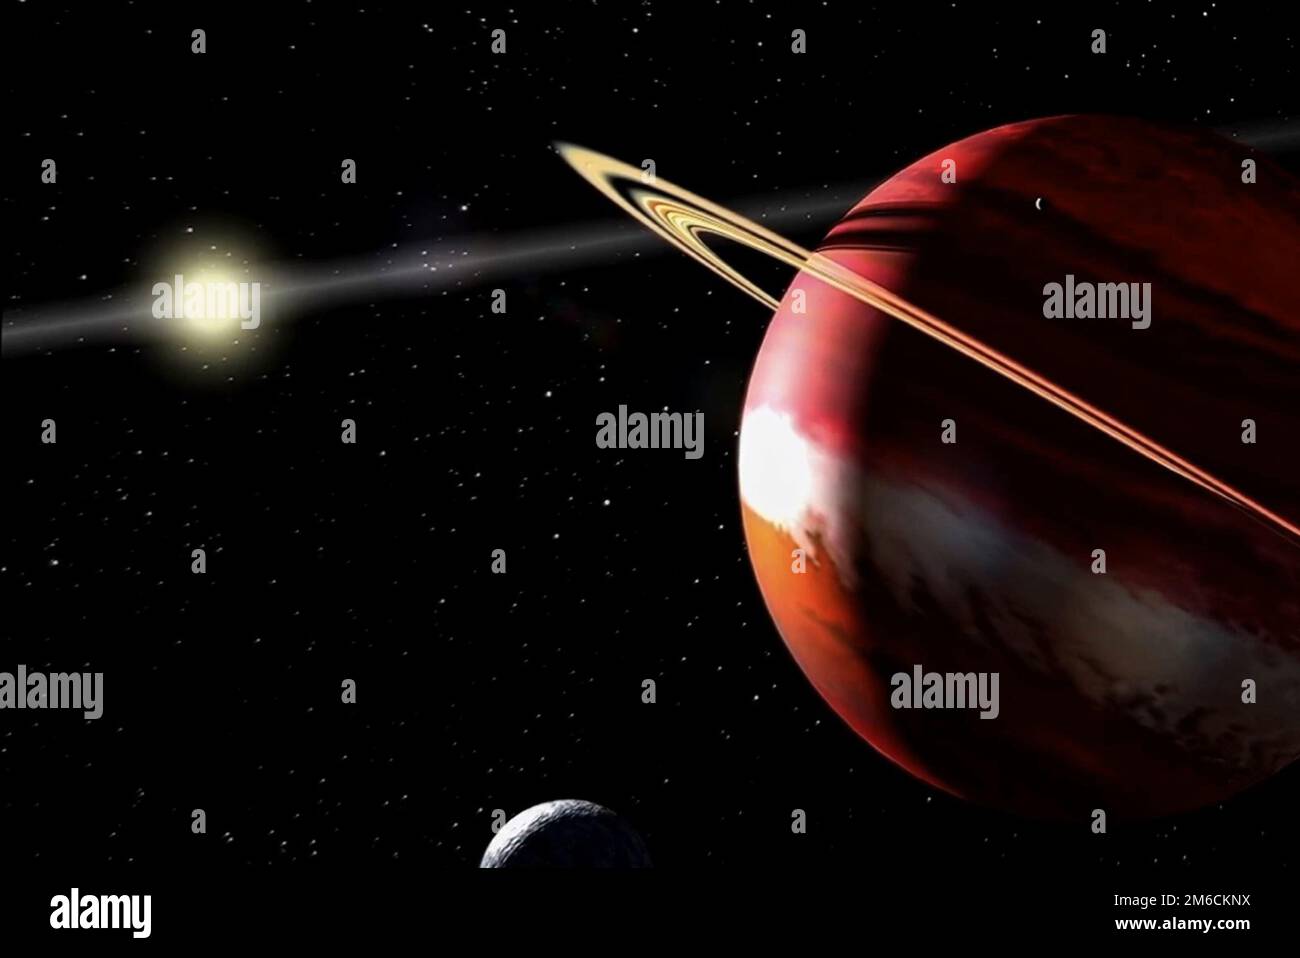 The planet is a gas giant with rings, similar to Saturn Stock Photo